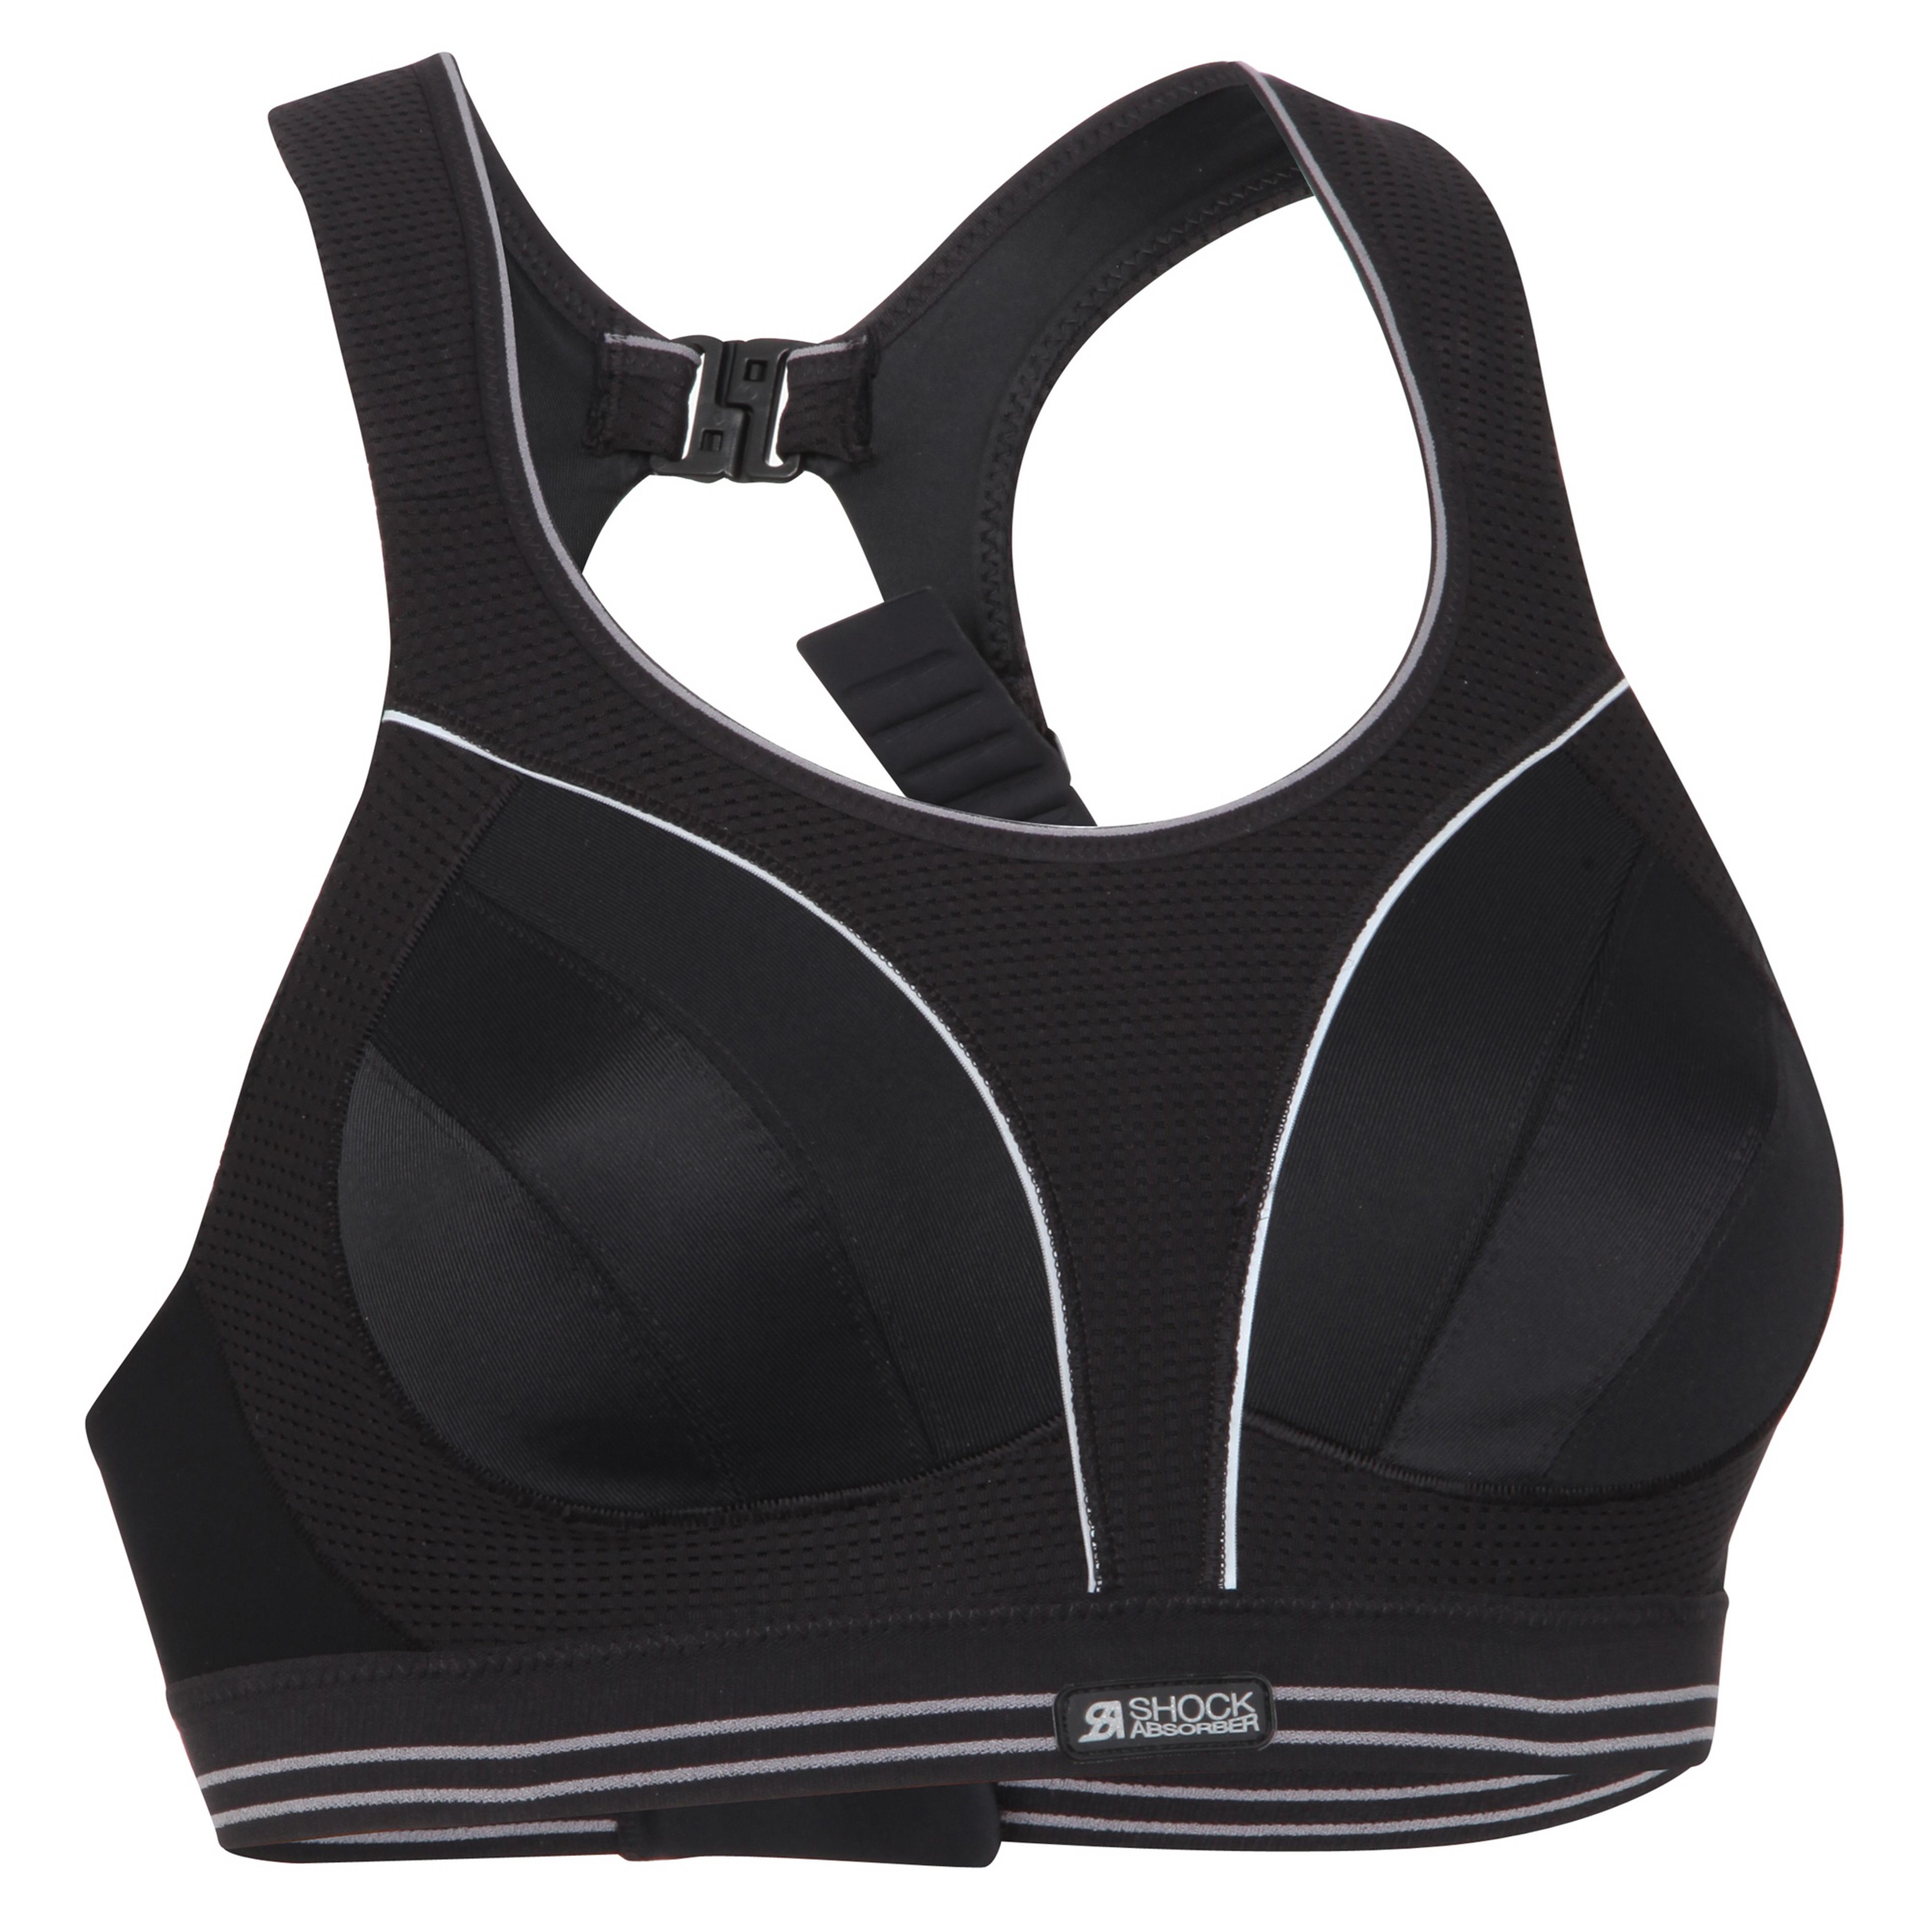 Horse & Hound - The new Berlei Horse Riding Bra is receiving rave